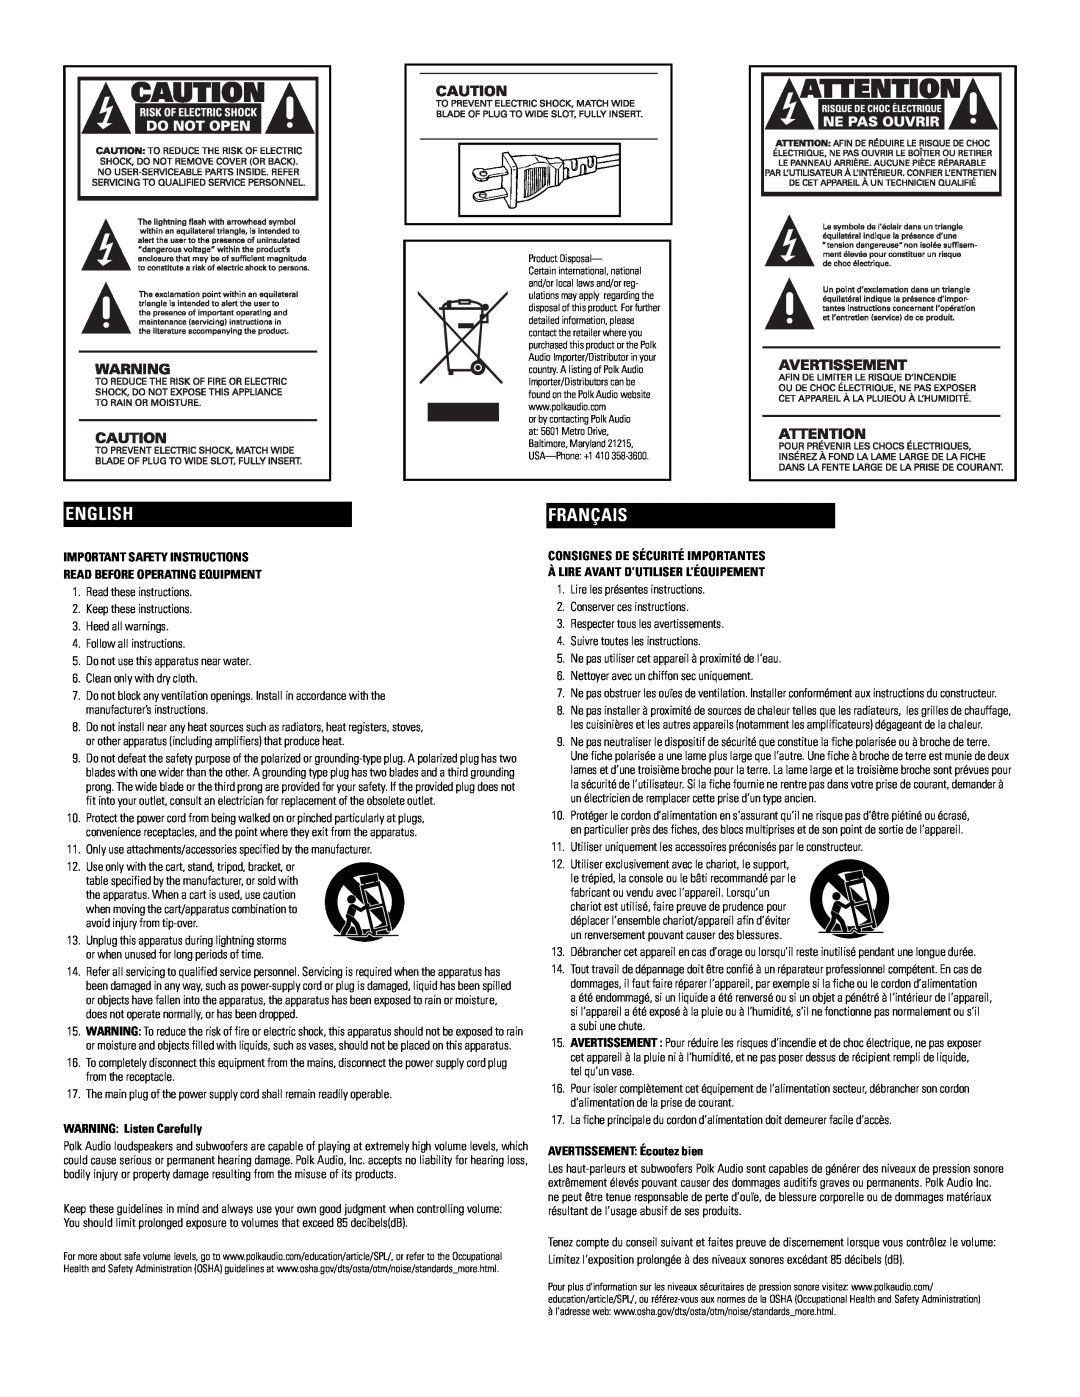 Polk Audio PSW111 owner manual Français, English, Important Safety Instructions, Read Before Operating Equipment 